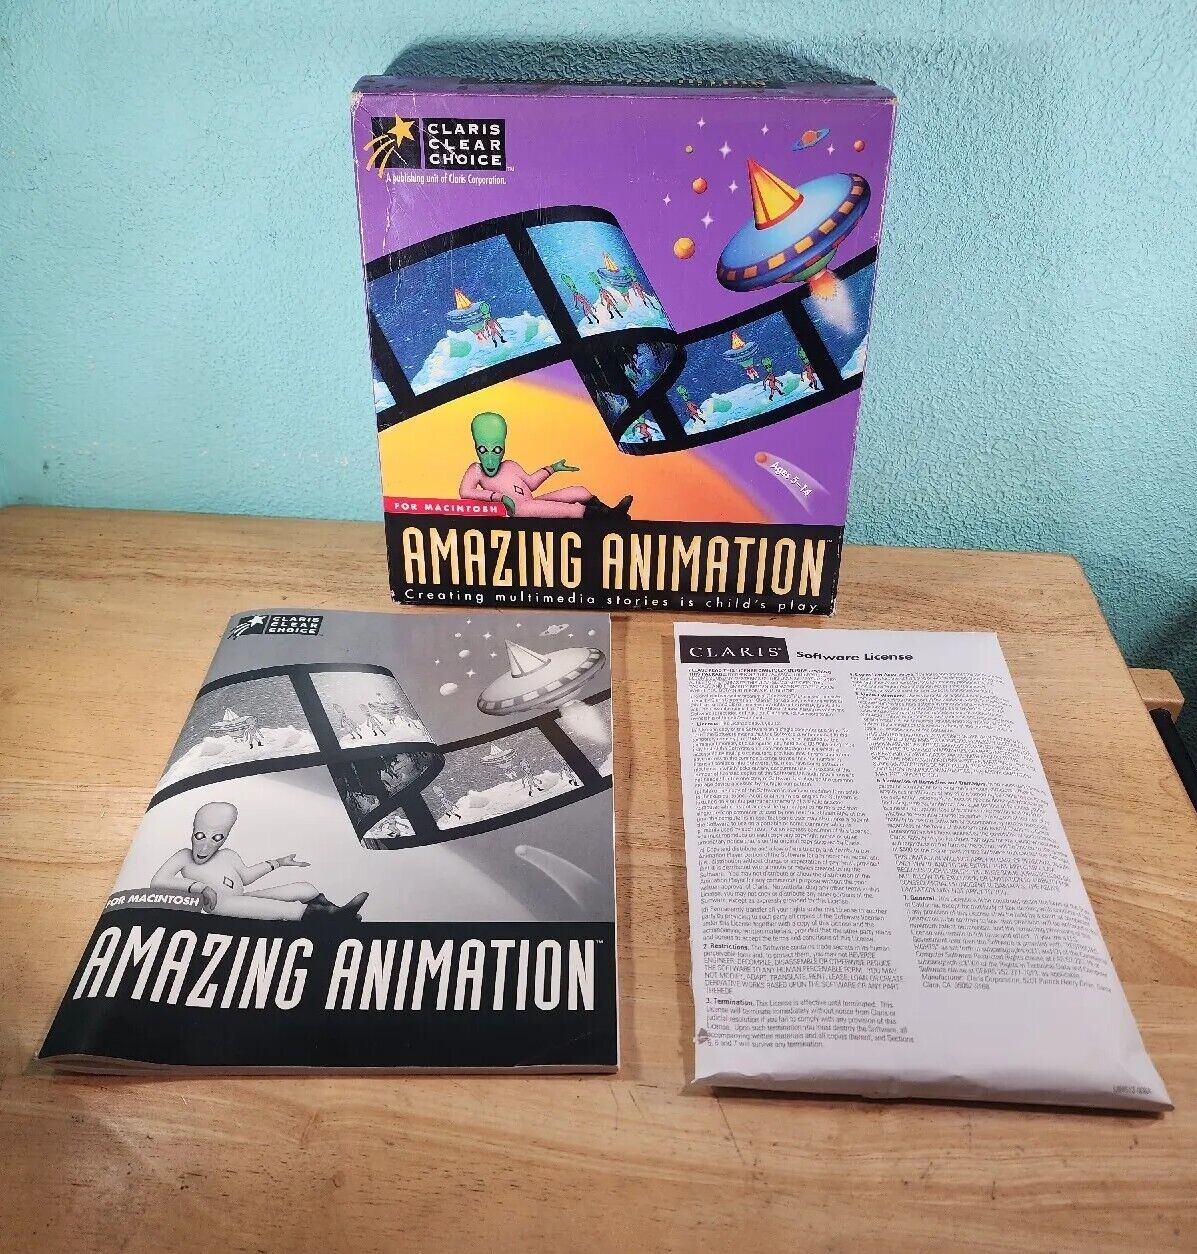 Amazing Animation by Claris Rare Vintage Software for Macintosh New